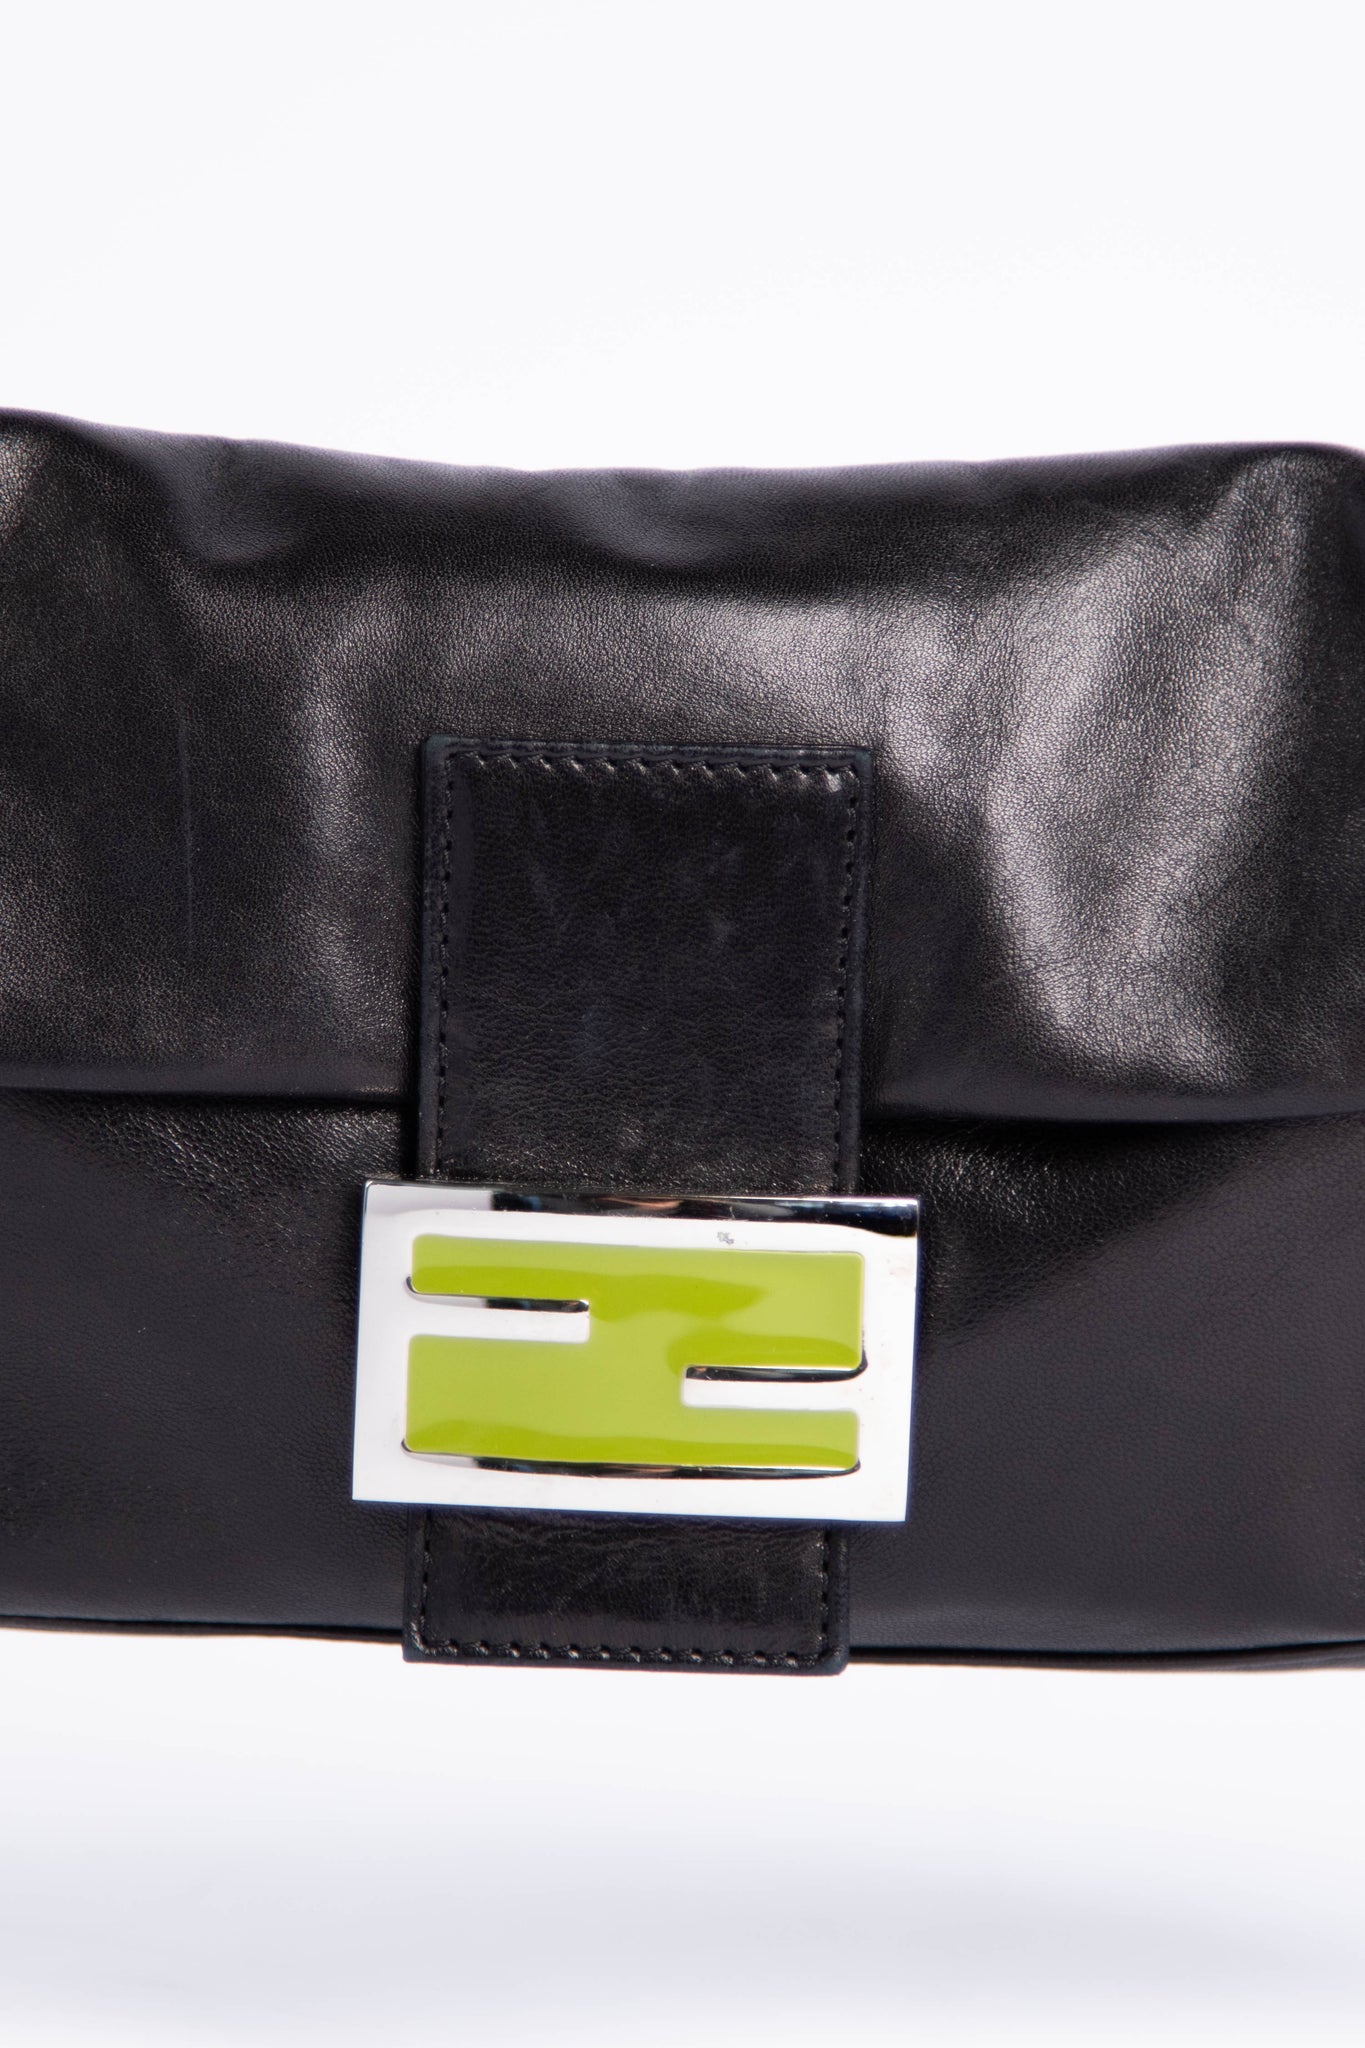 Baguette Phone Pouch - Green patent leather pouch